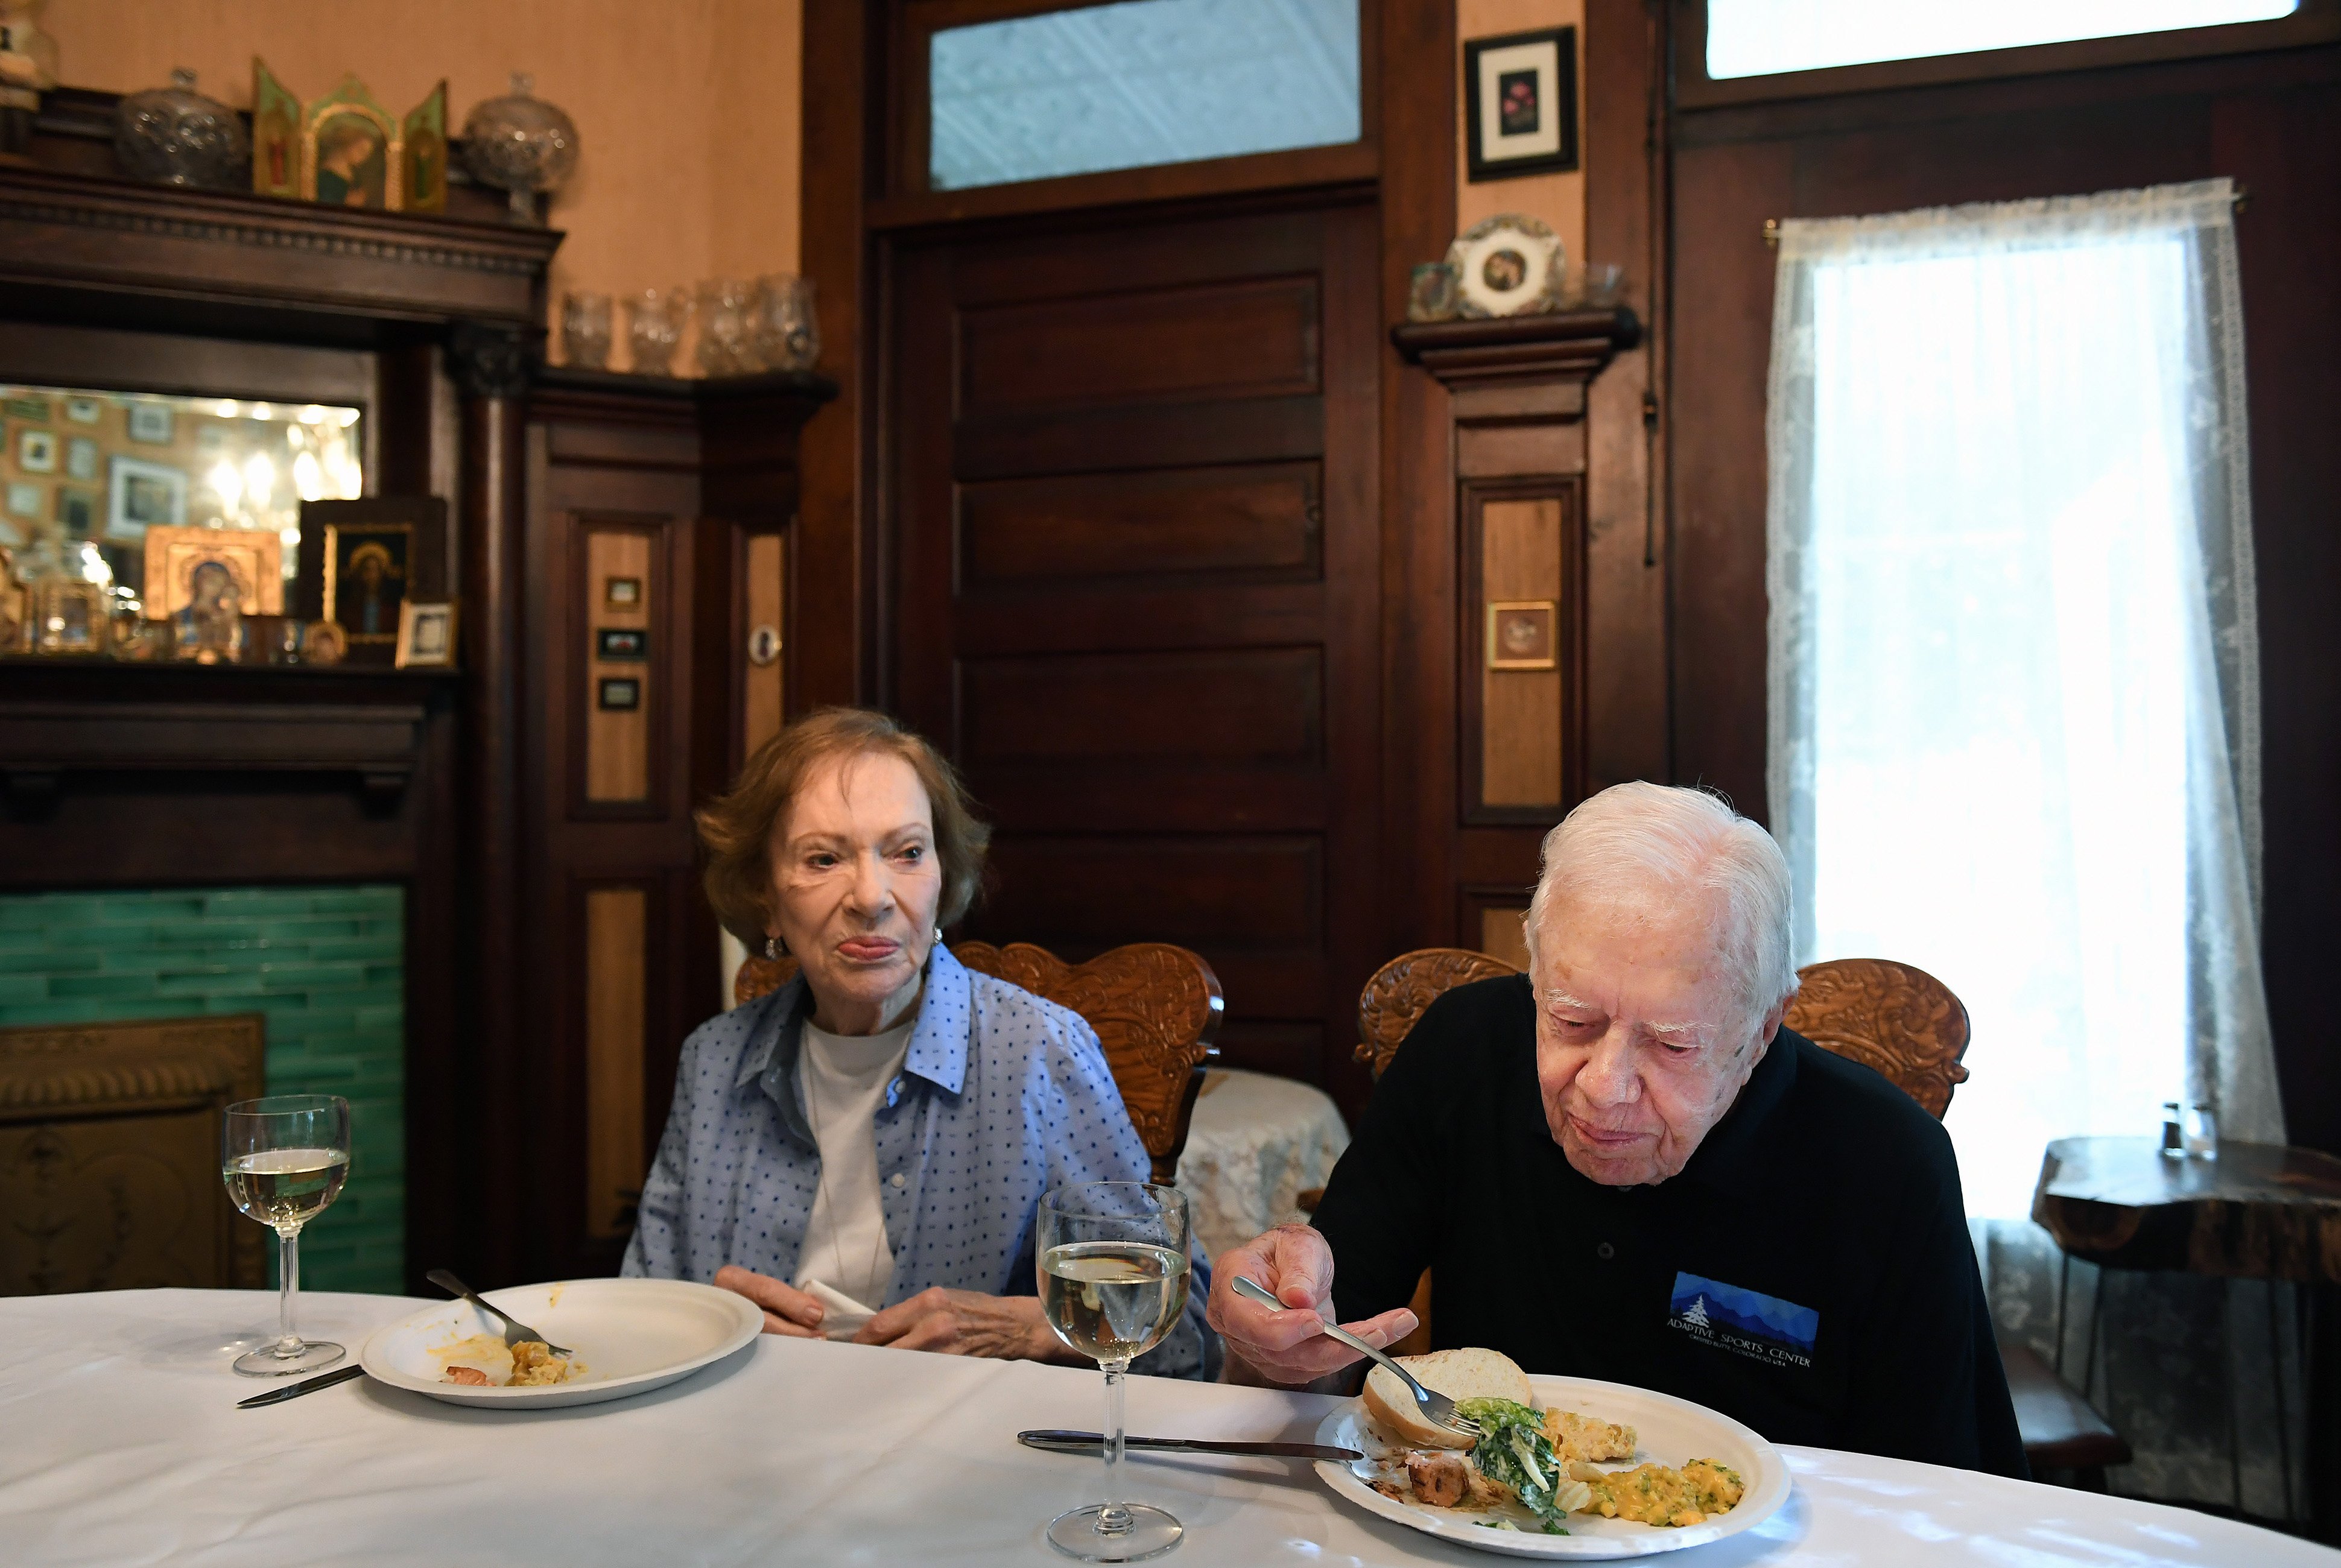 Former President of the United States Jimmy Carter and his wife, former First Lady Rosalynn Carter, having dinner at the home of Jill Stuckey on August 4, 2018, in Plains, Georgia | Source: Getty Images